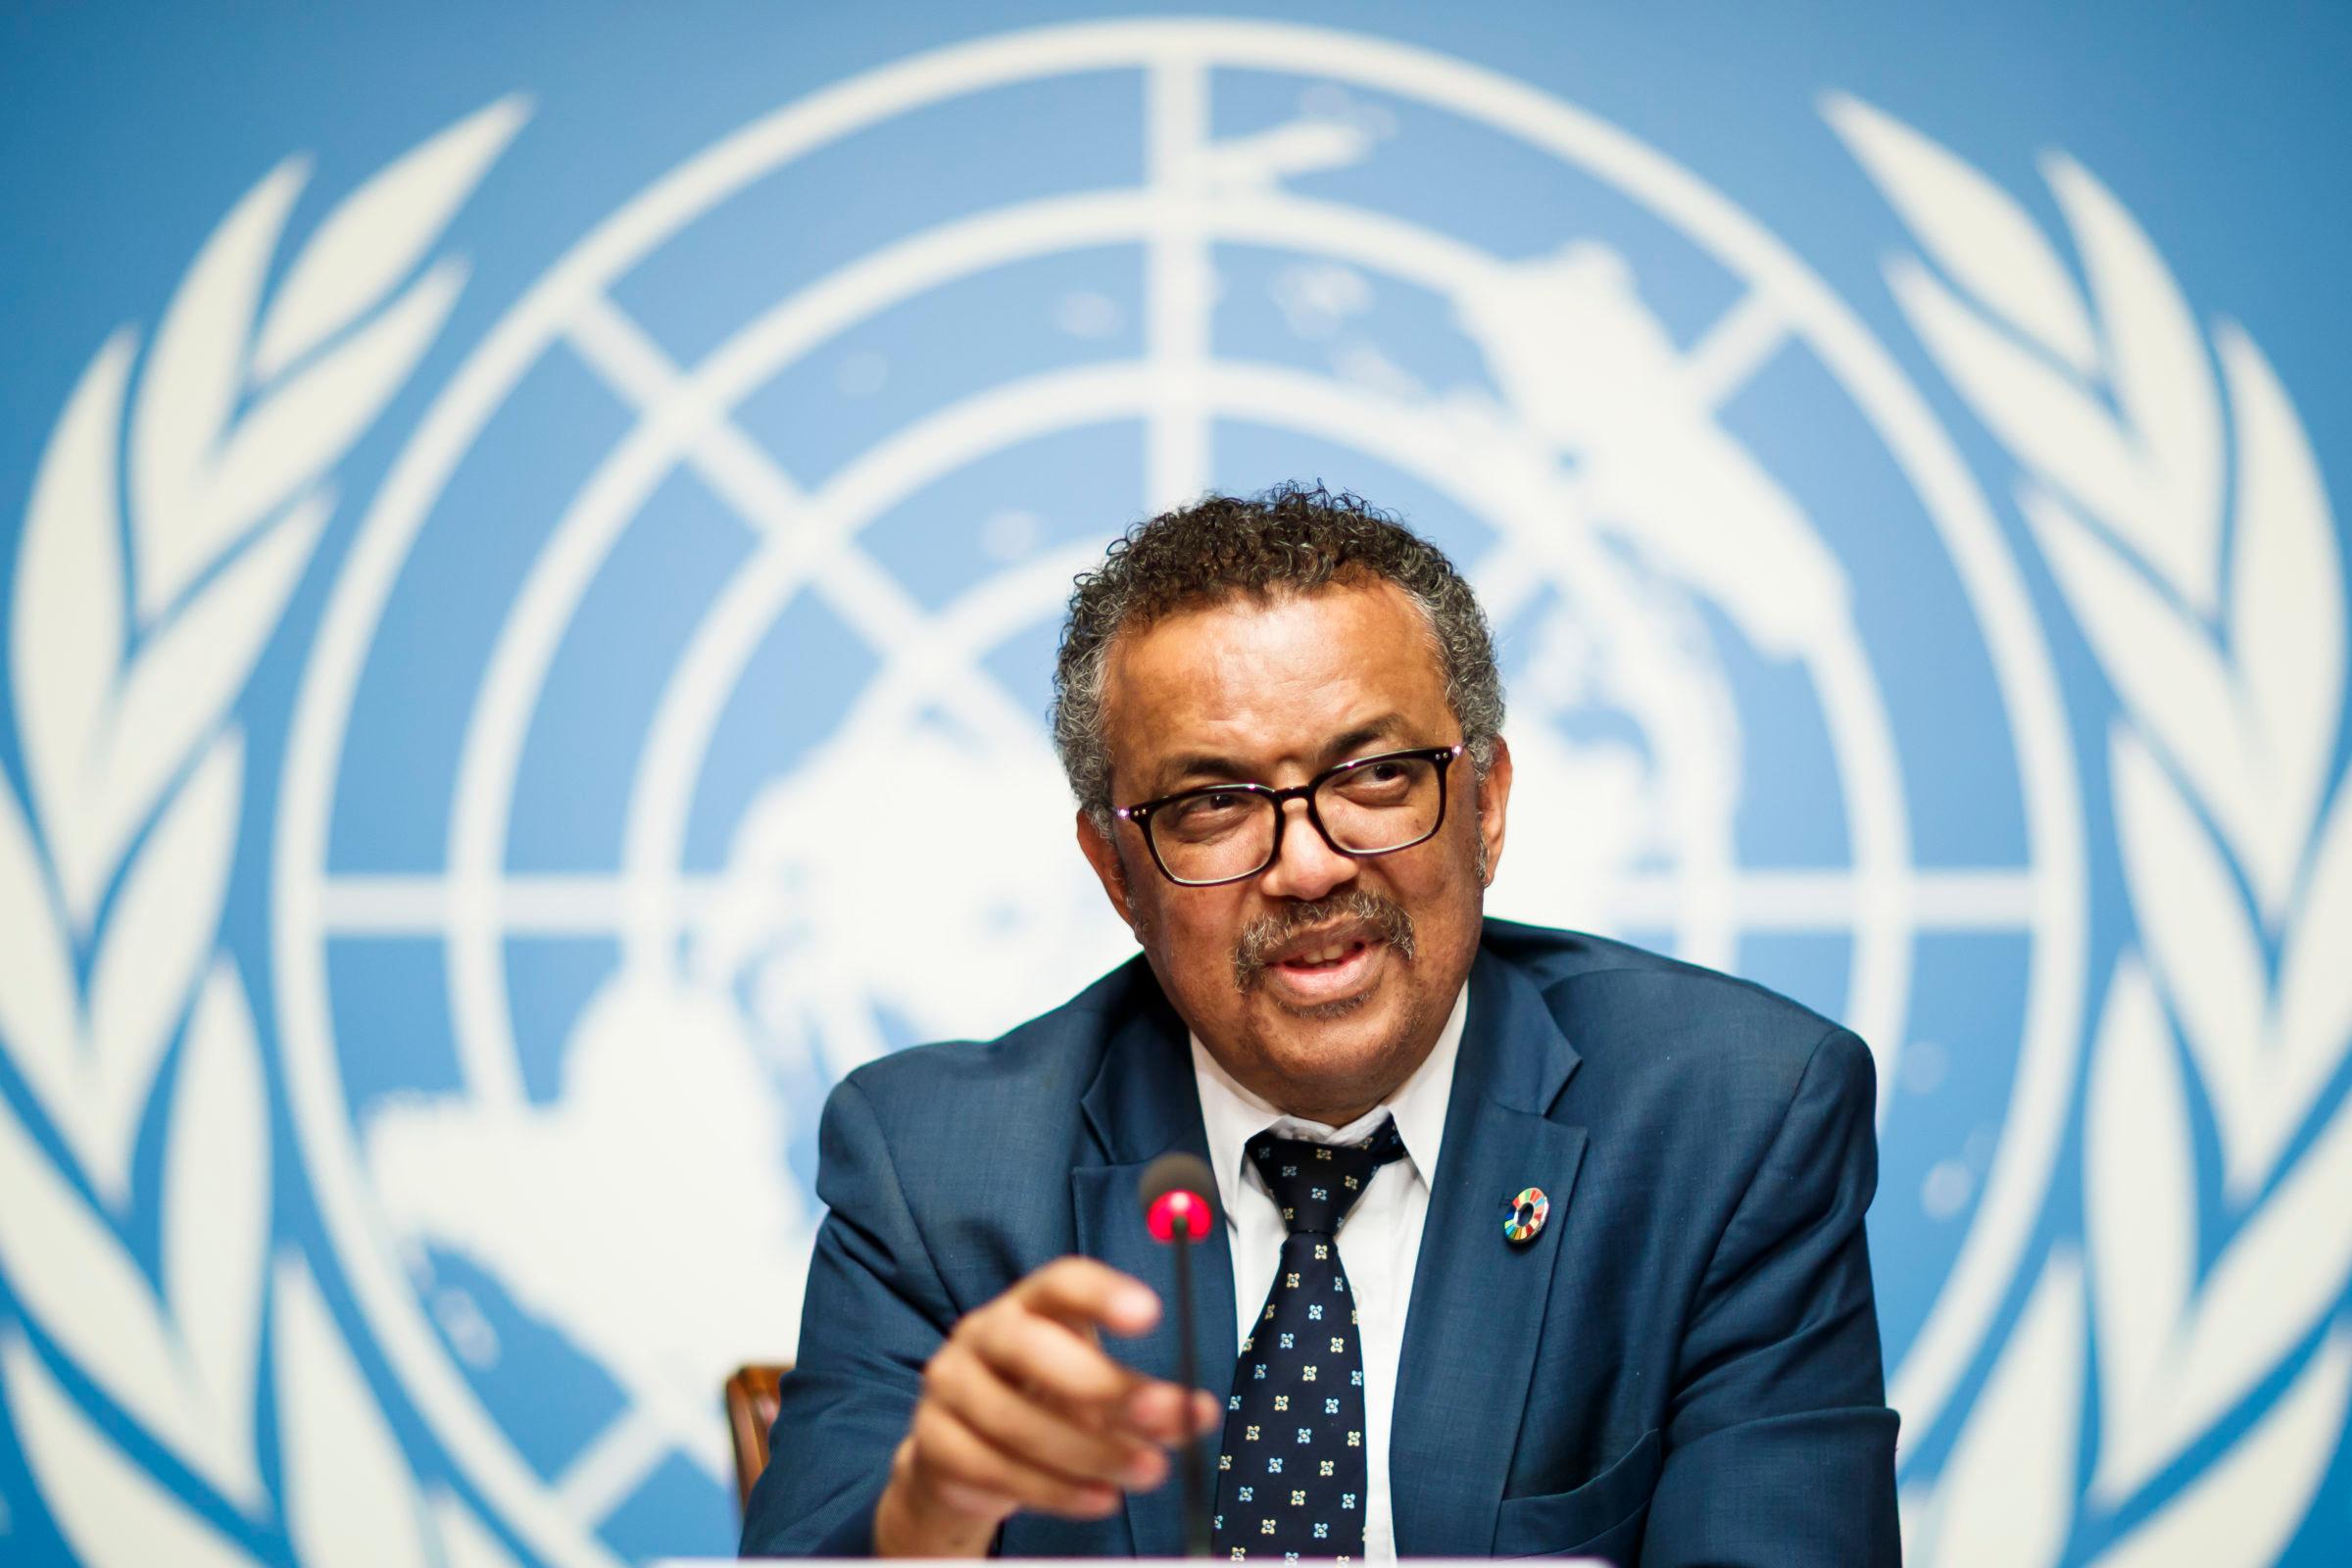 WHO Director General Tedros Adhanom Ghebreyesus: We urge countries to continue using this important COVID-19 vaccine - Avaz